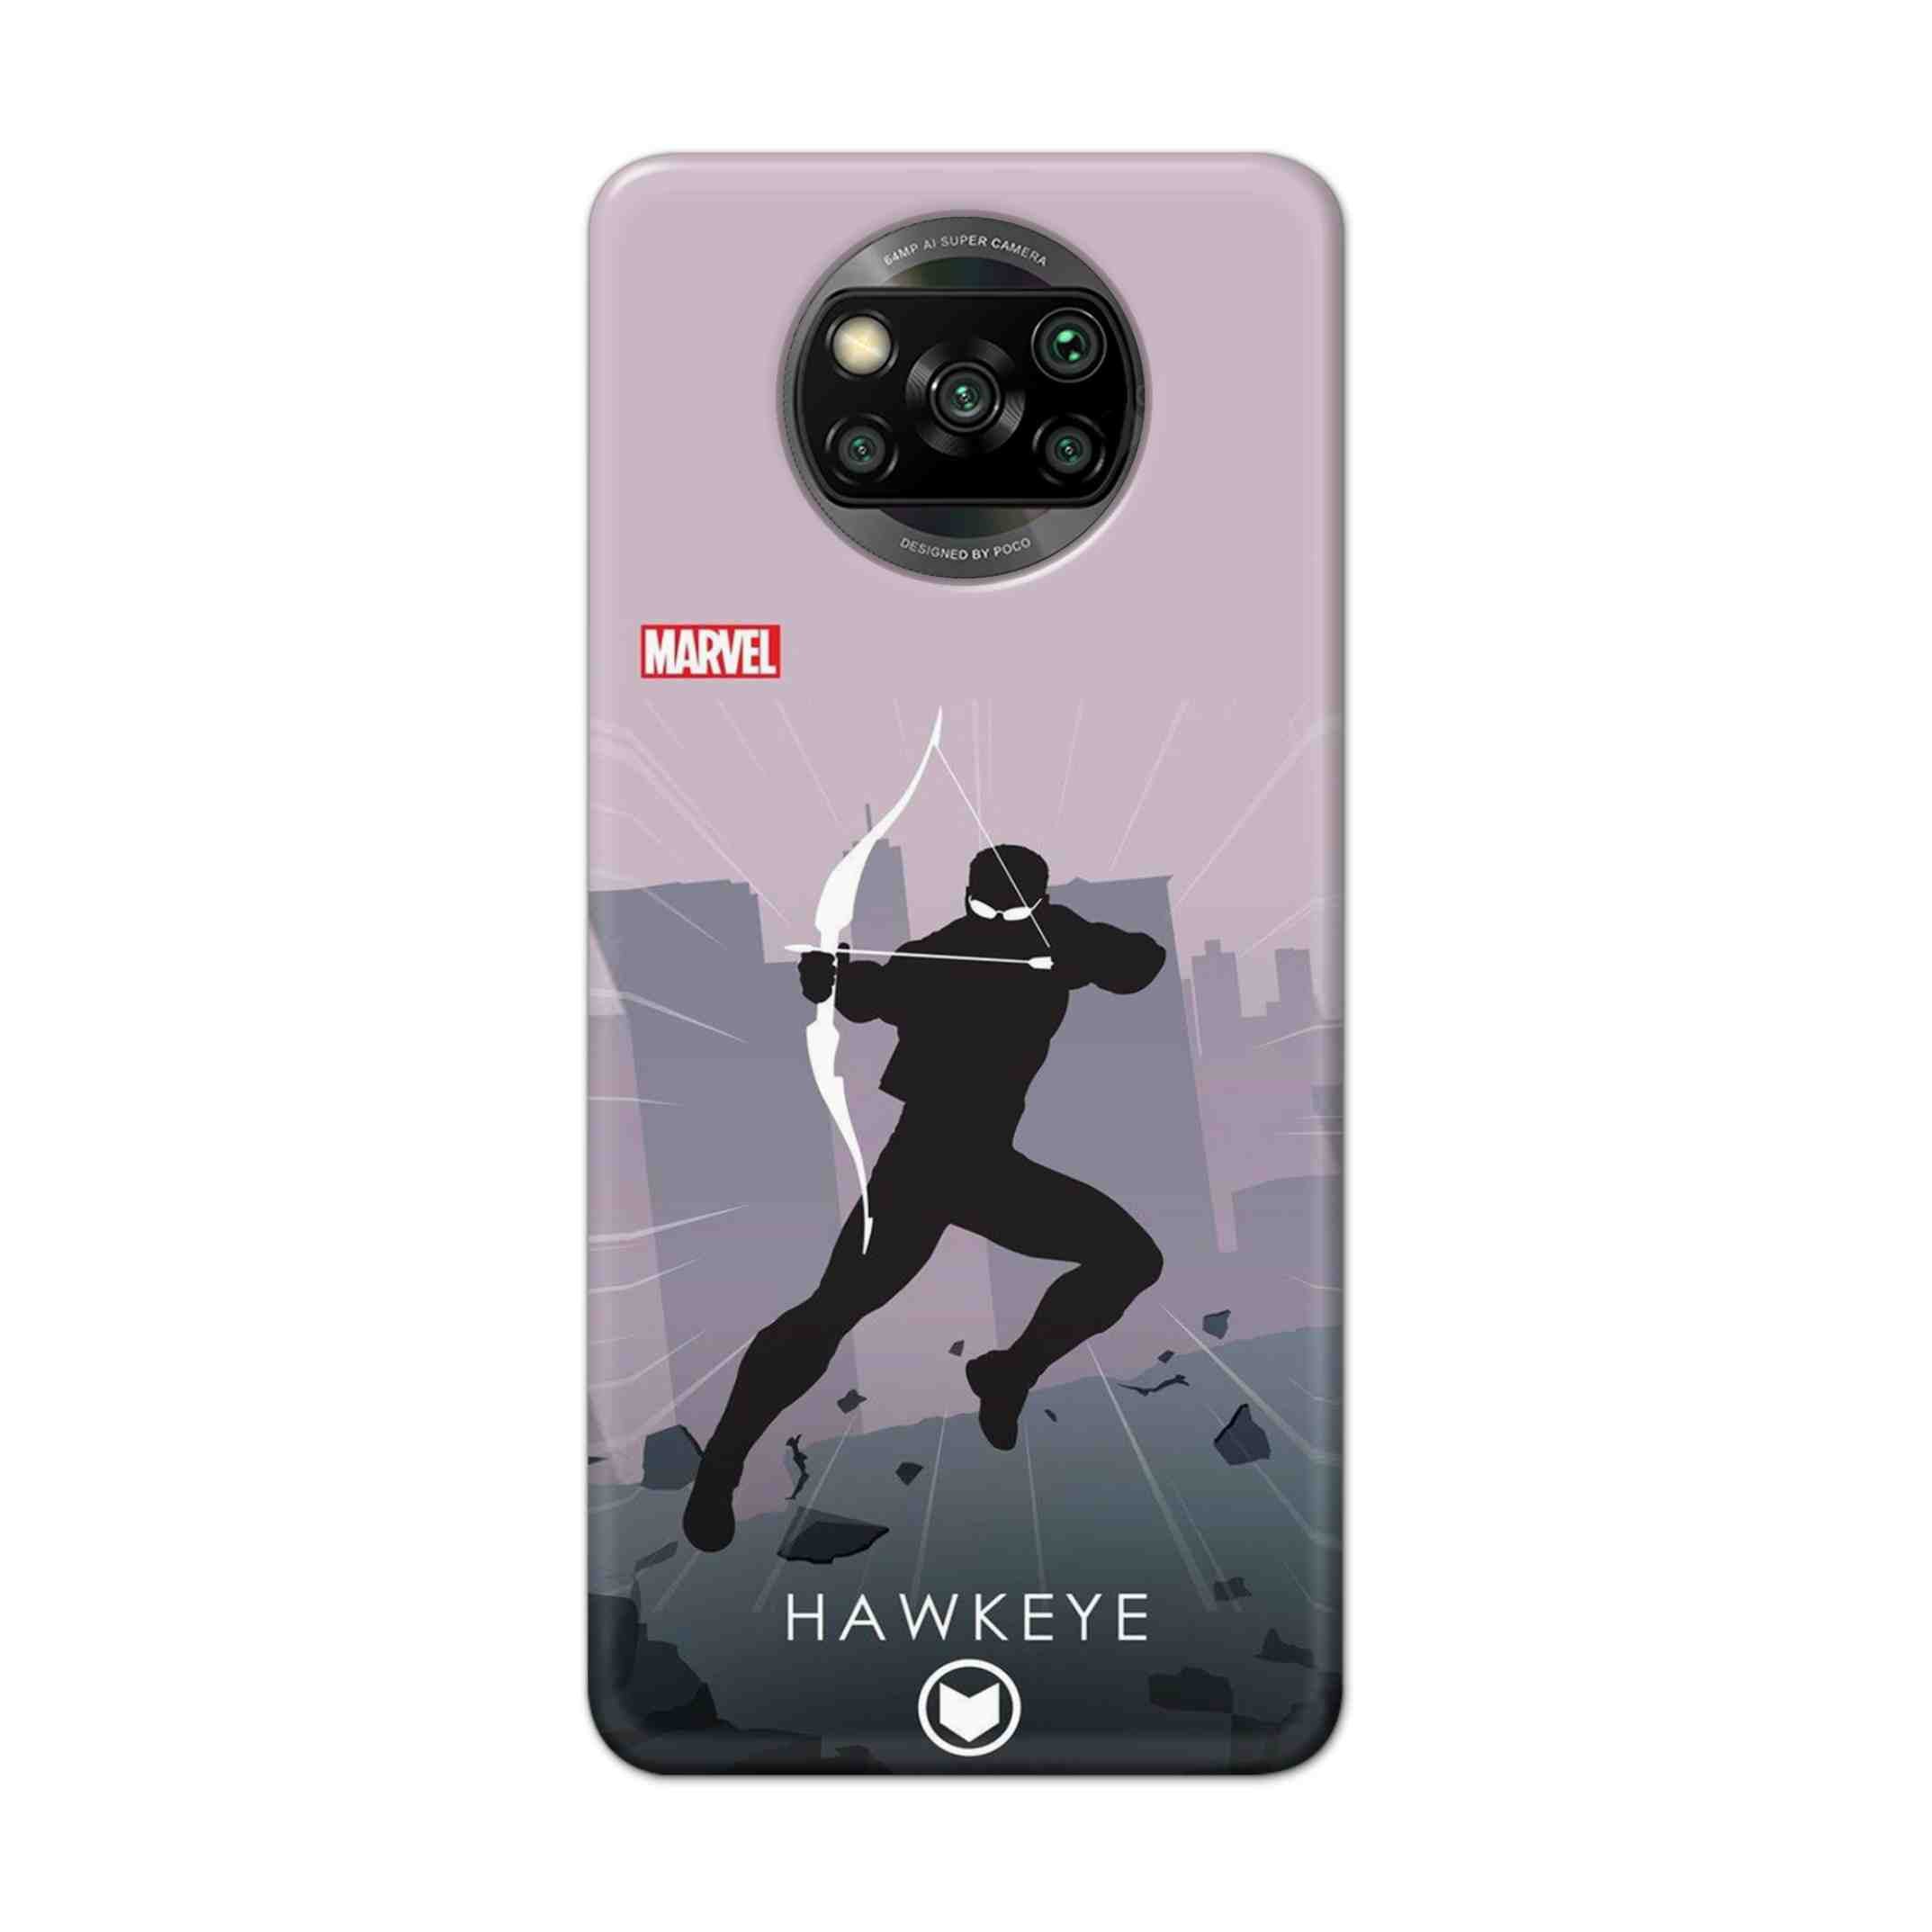 Buy Hawkeye Hard Back Mobile Phone Case Cover For Pcoc X3 NFC Online